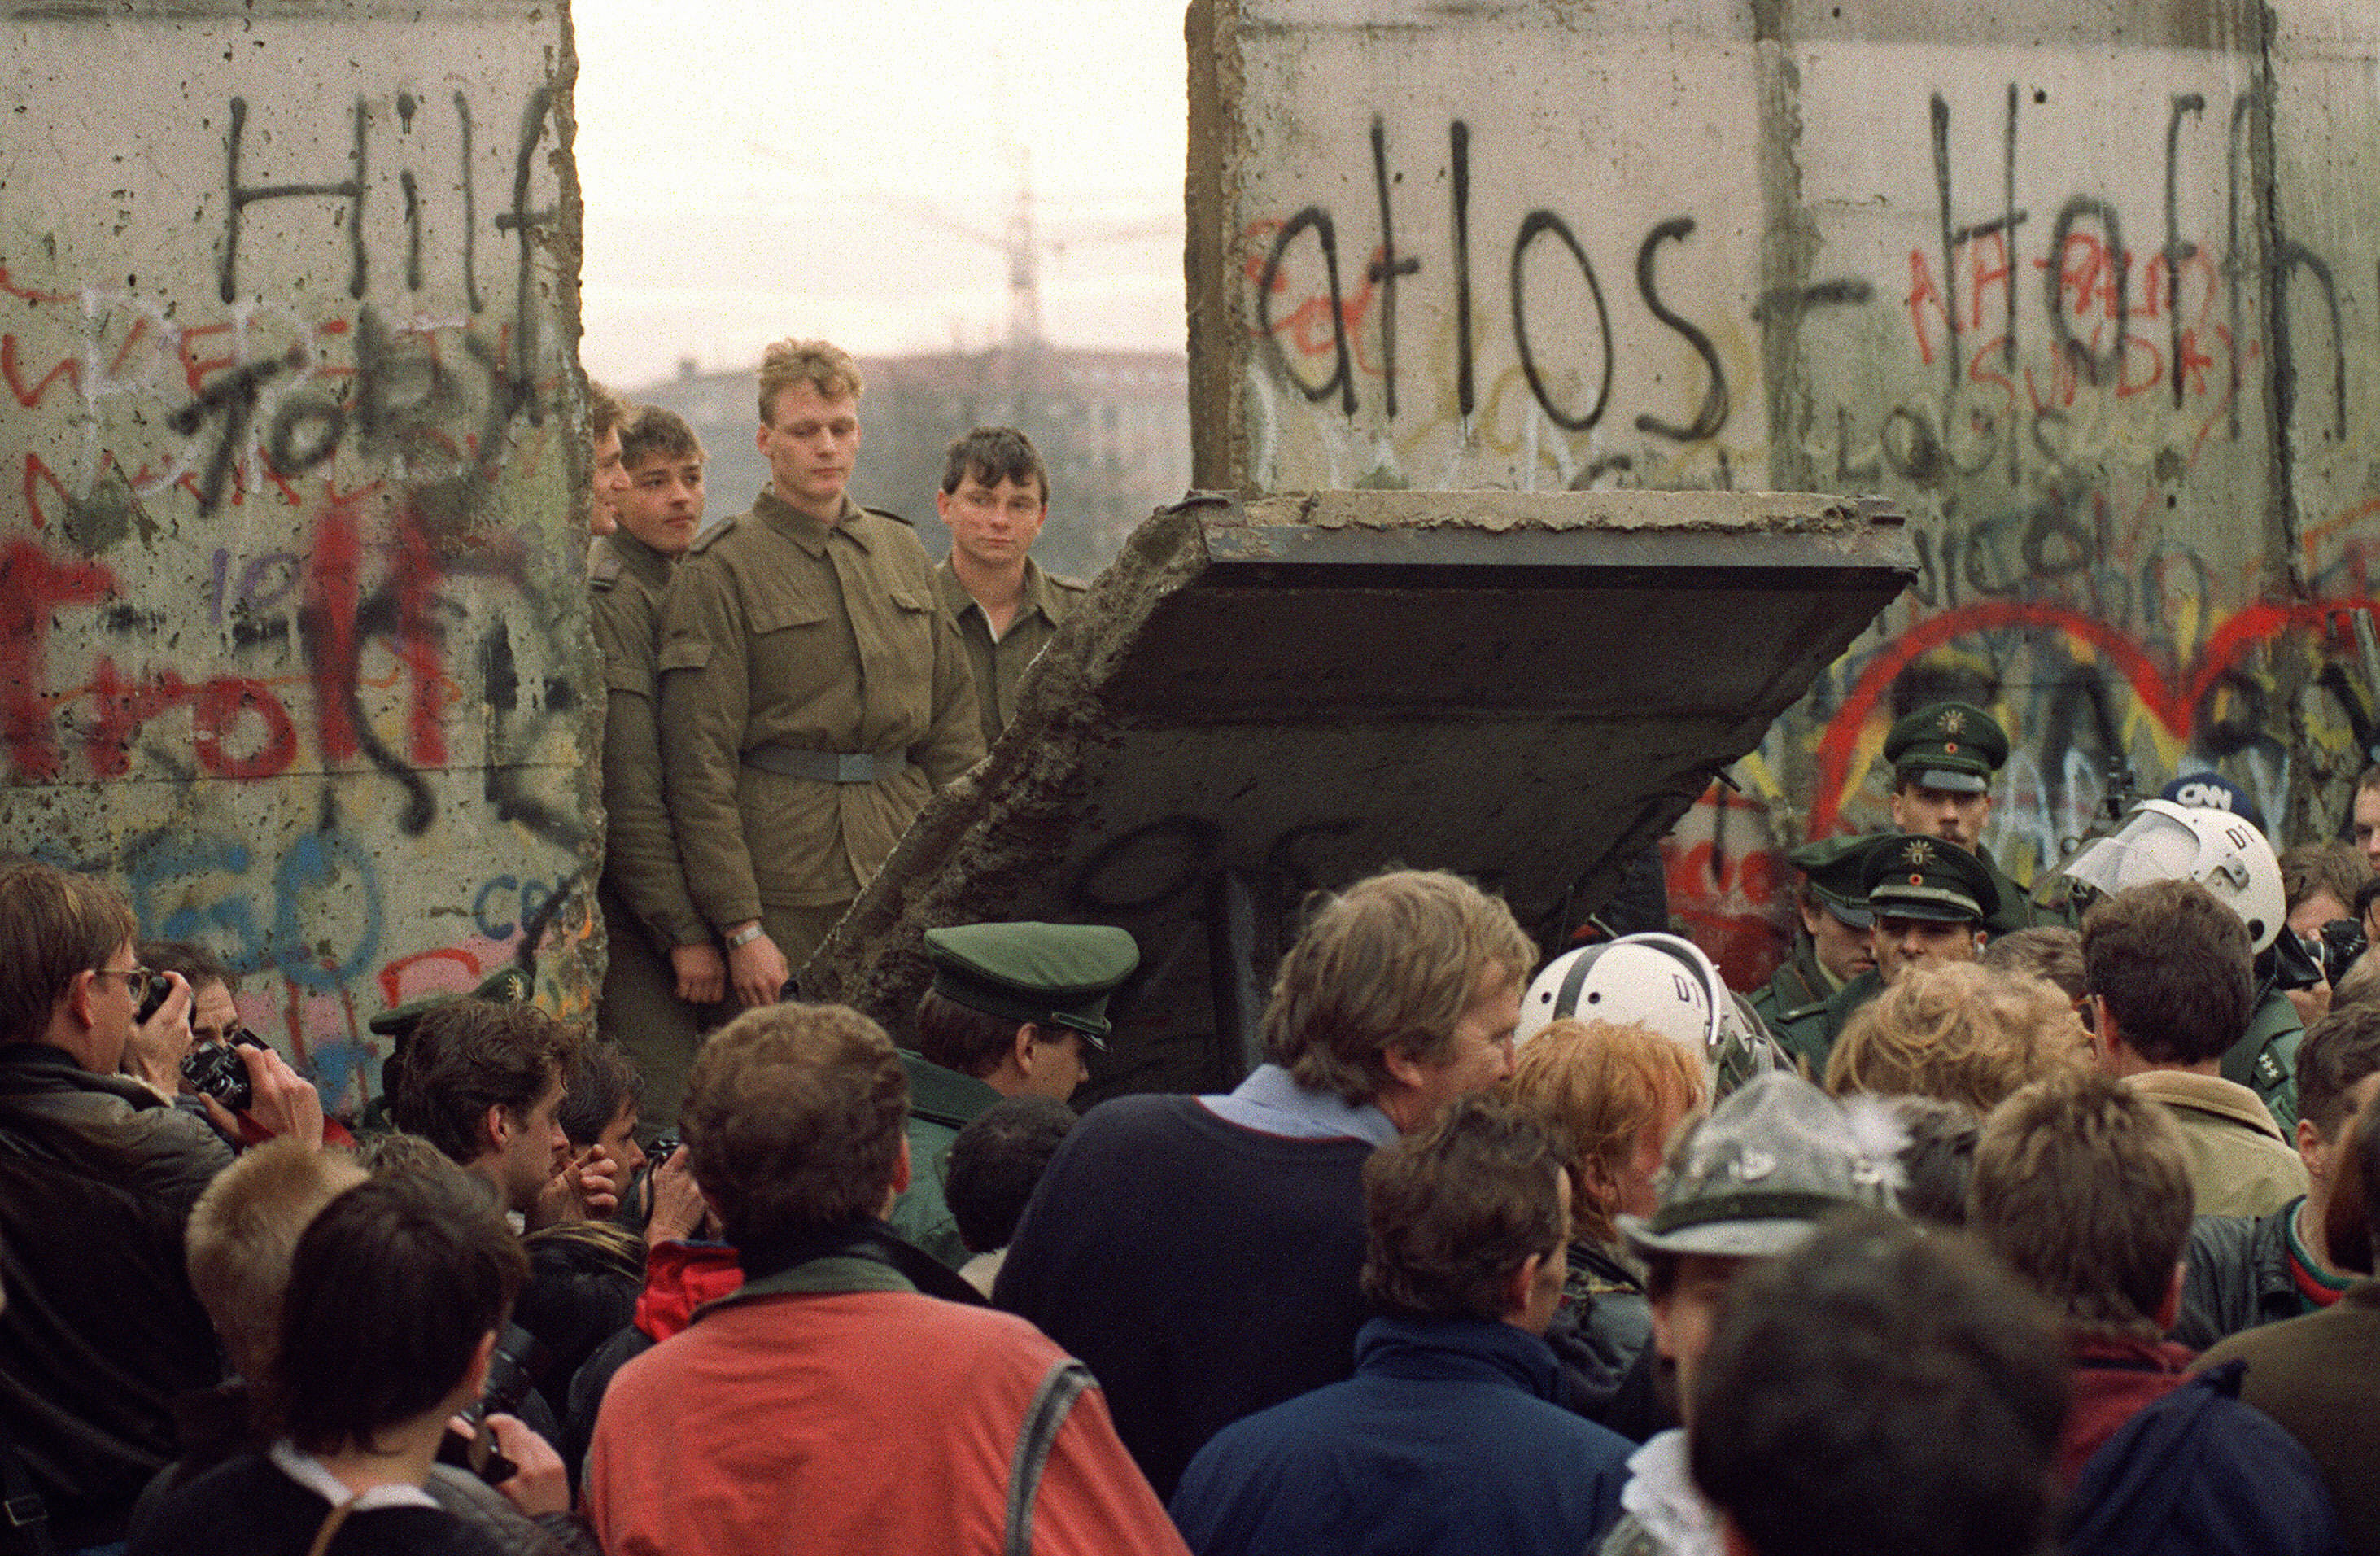 A crowd in front of the Berlin Wall on Nov. 11, 1989 watches border guards demolish a section of the wall in order to open a new crossing point between East and West Berlin in Germany.